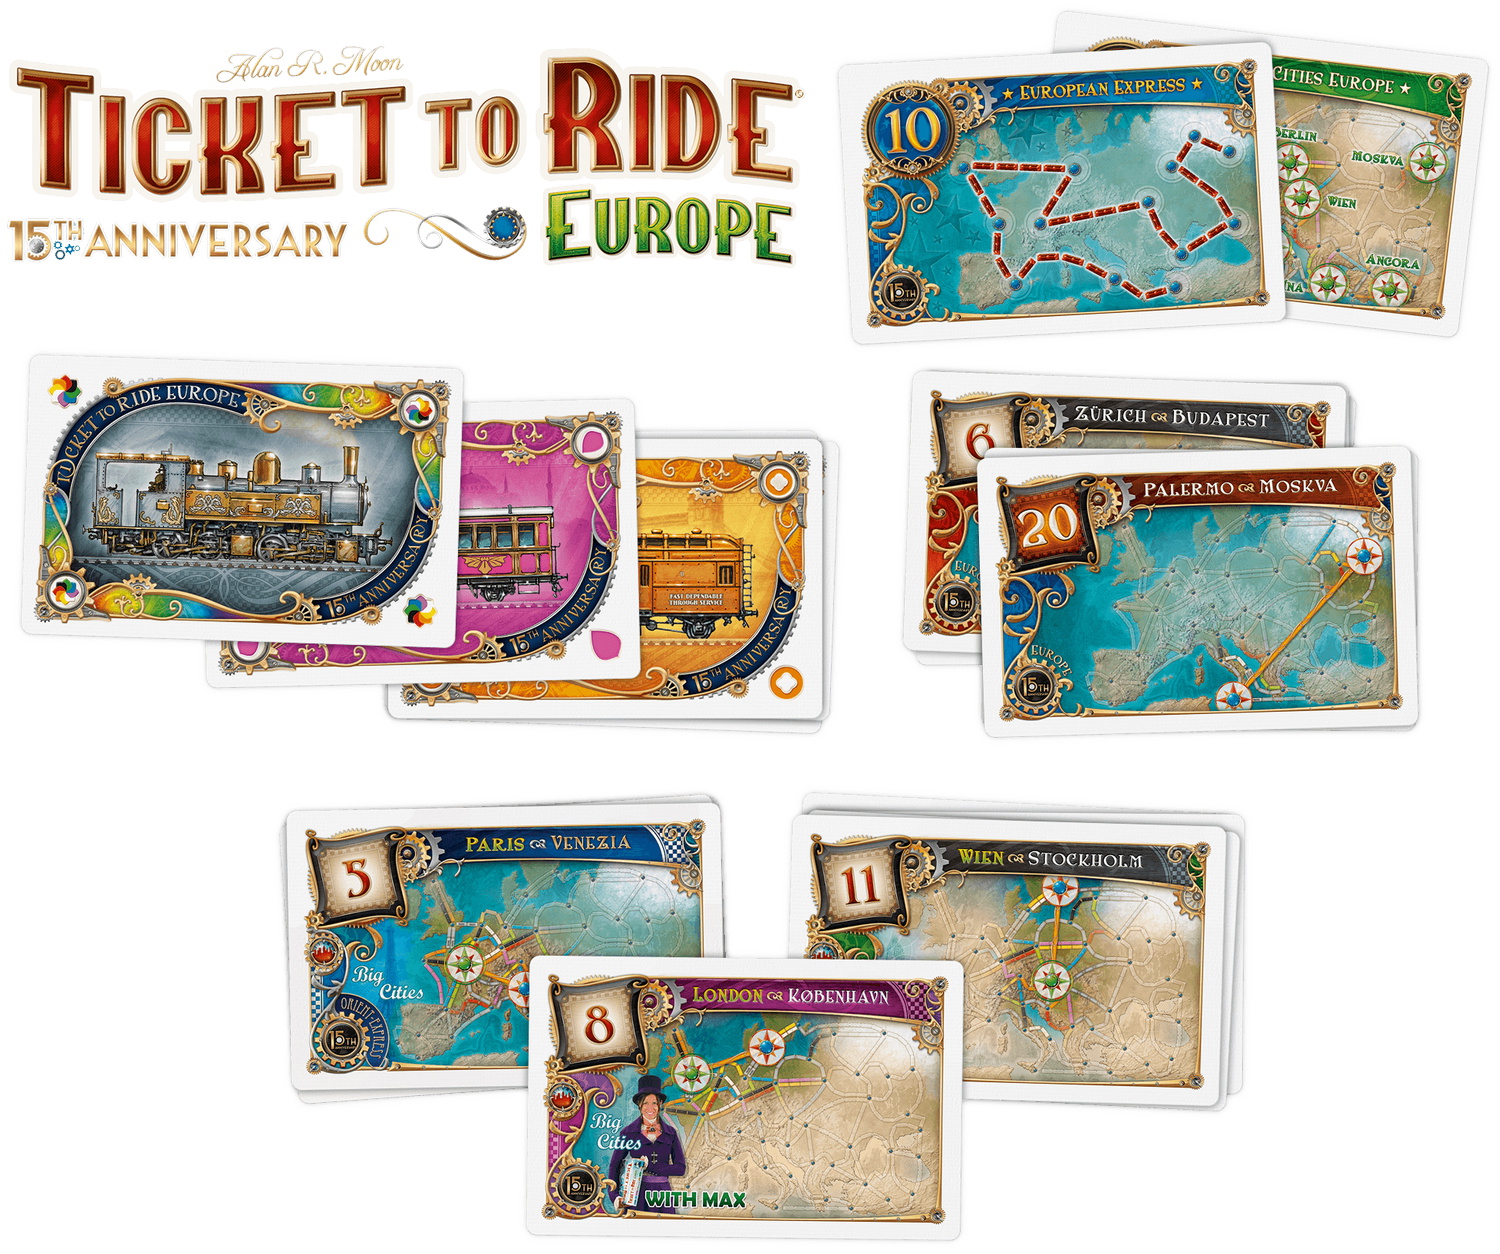 Ticket To Ride Europe 15th Anniversary